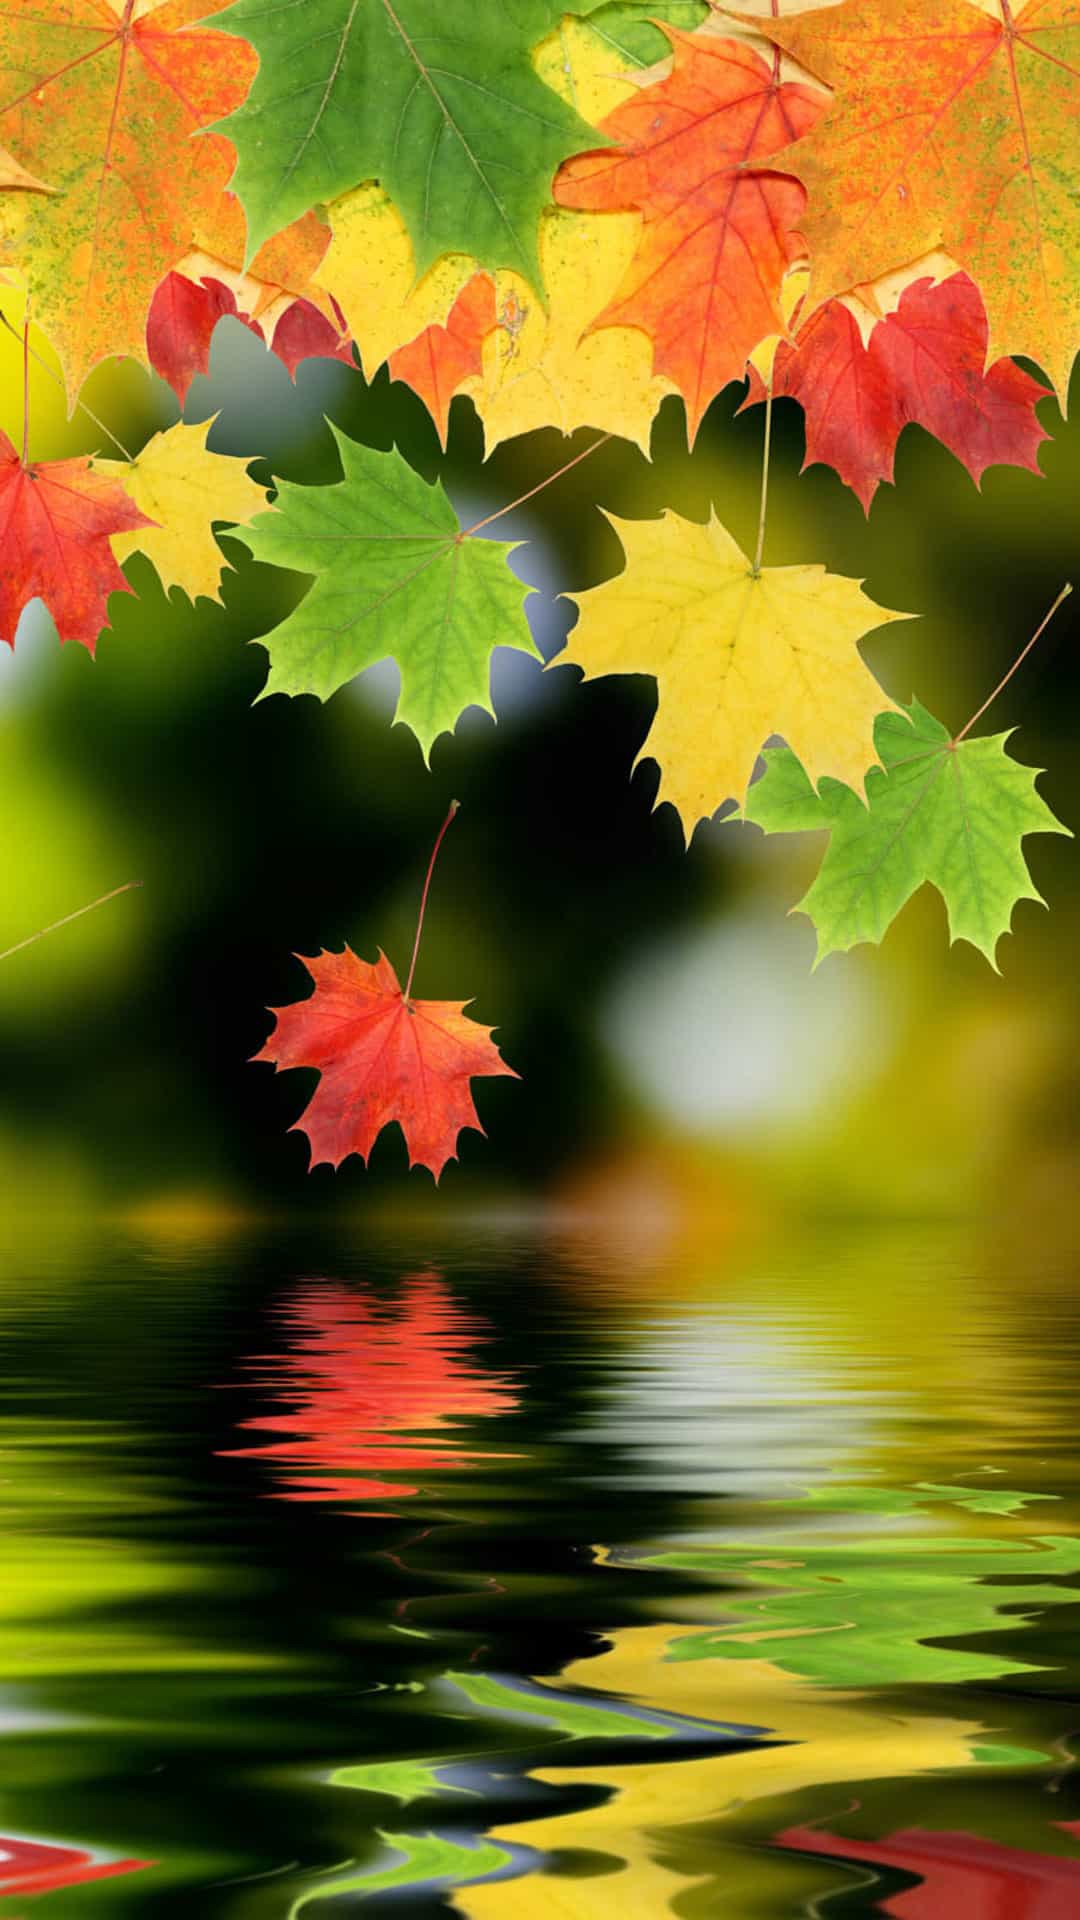 Autumn Maple Leafs Android Wallpaper